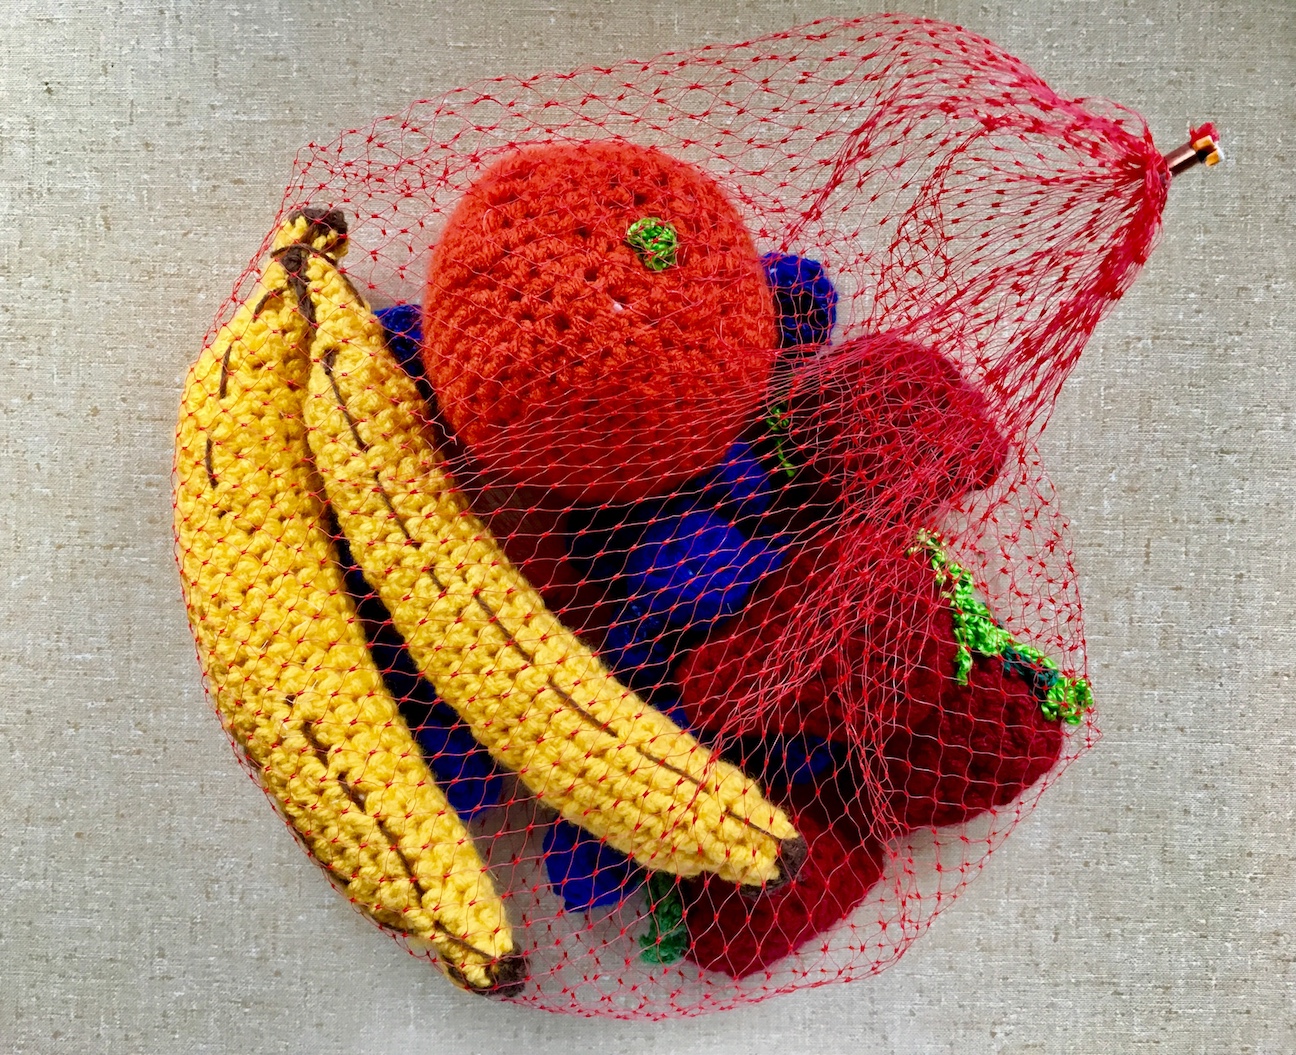 knitted 3D fruit in a bag made of netting